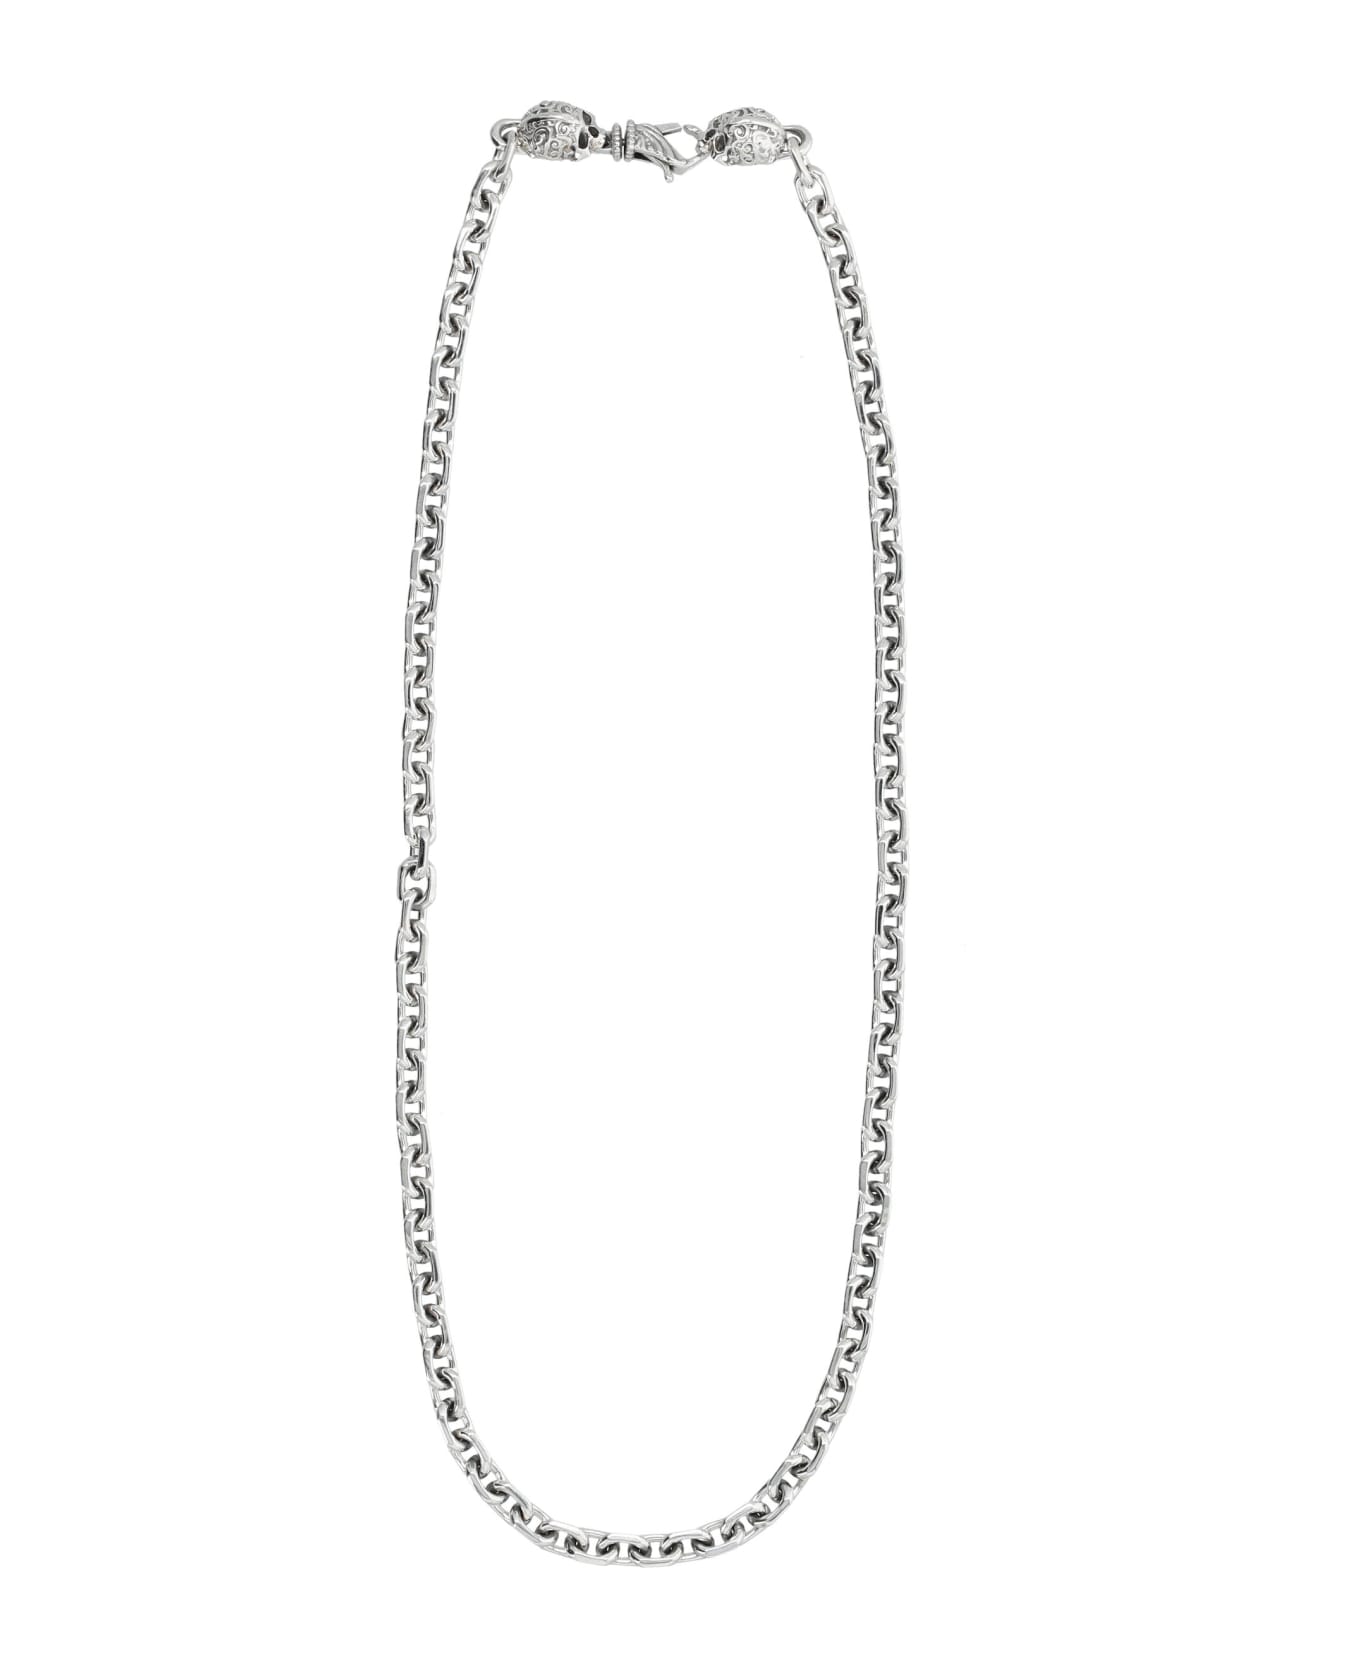 Emanuele Bicocchi Link Chain Necklace With Skulls - SILVER